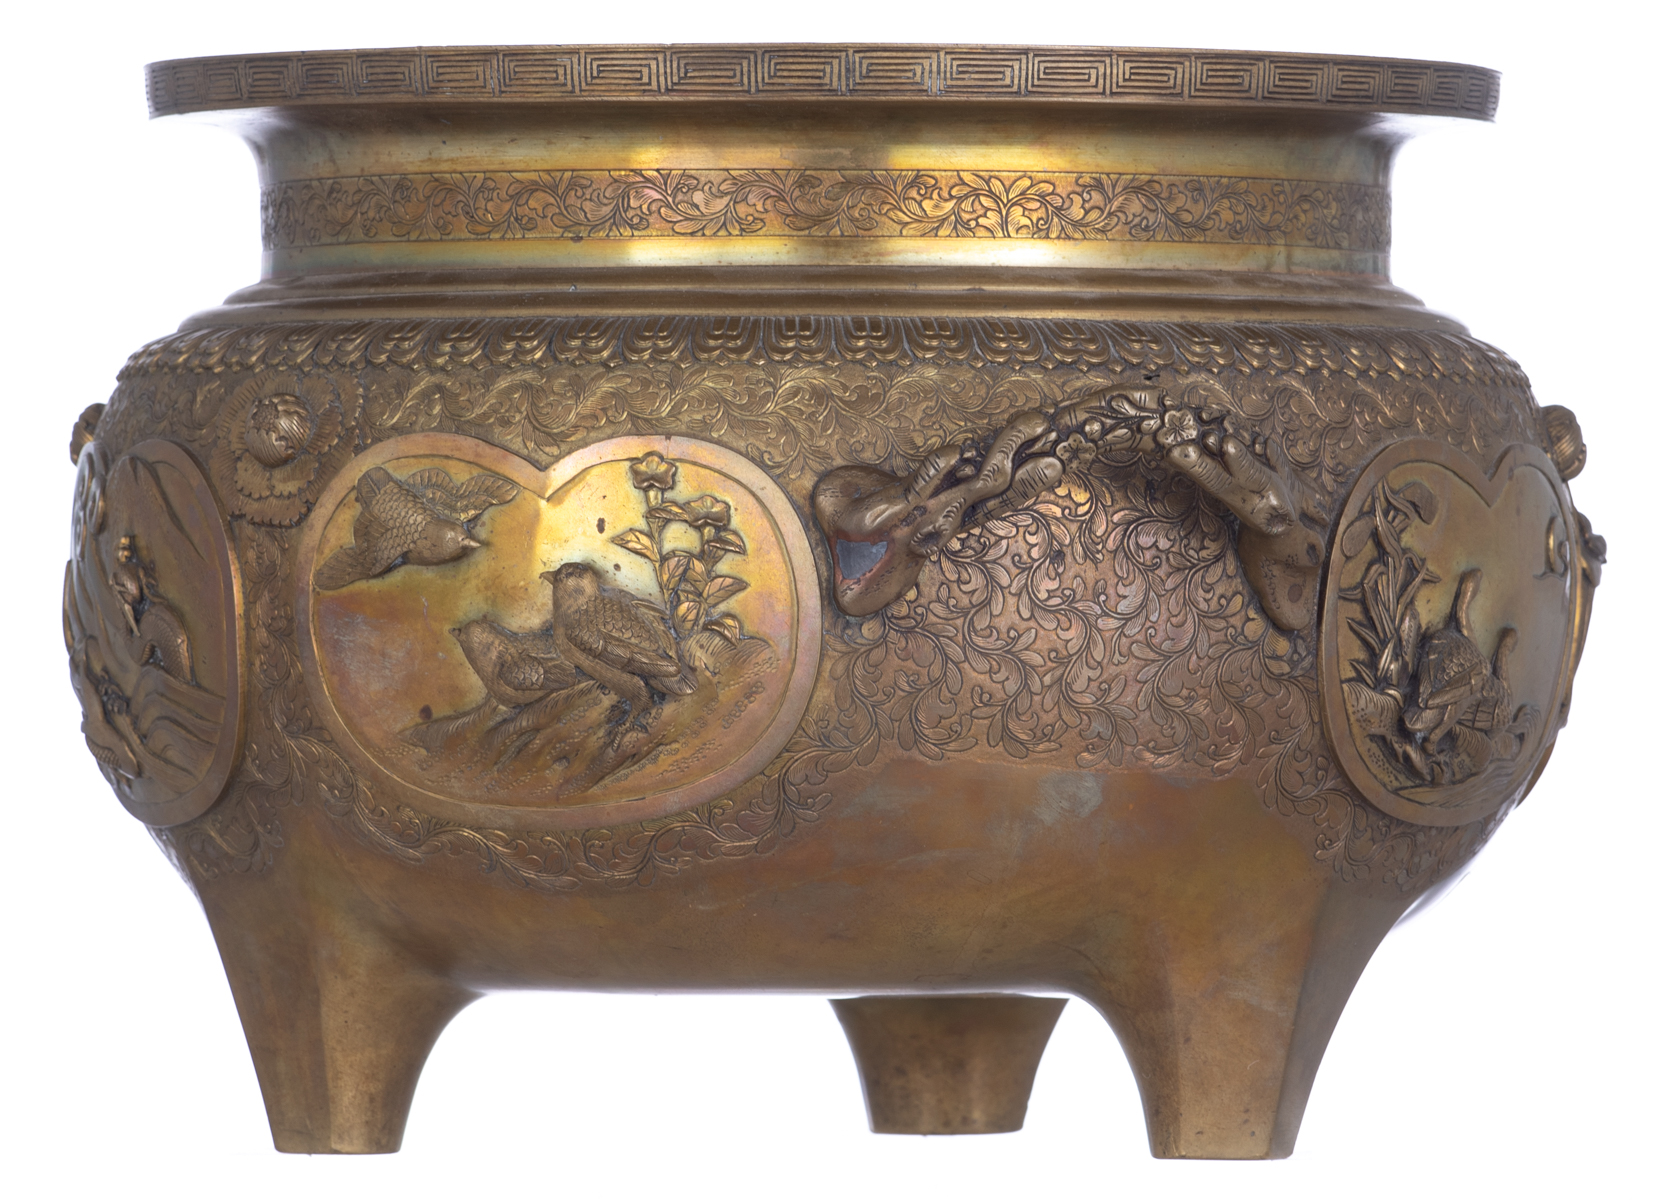 A Chinese relief decorated bronze tripod incense burner, the panels with birds, flowers and a dragon - Image 2 of 7